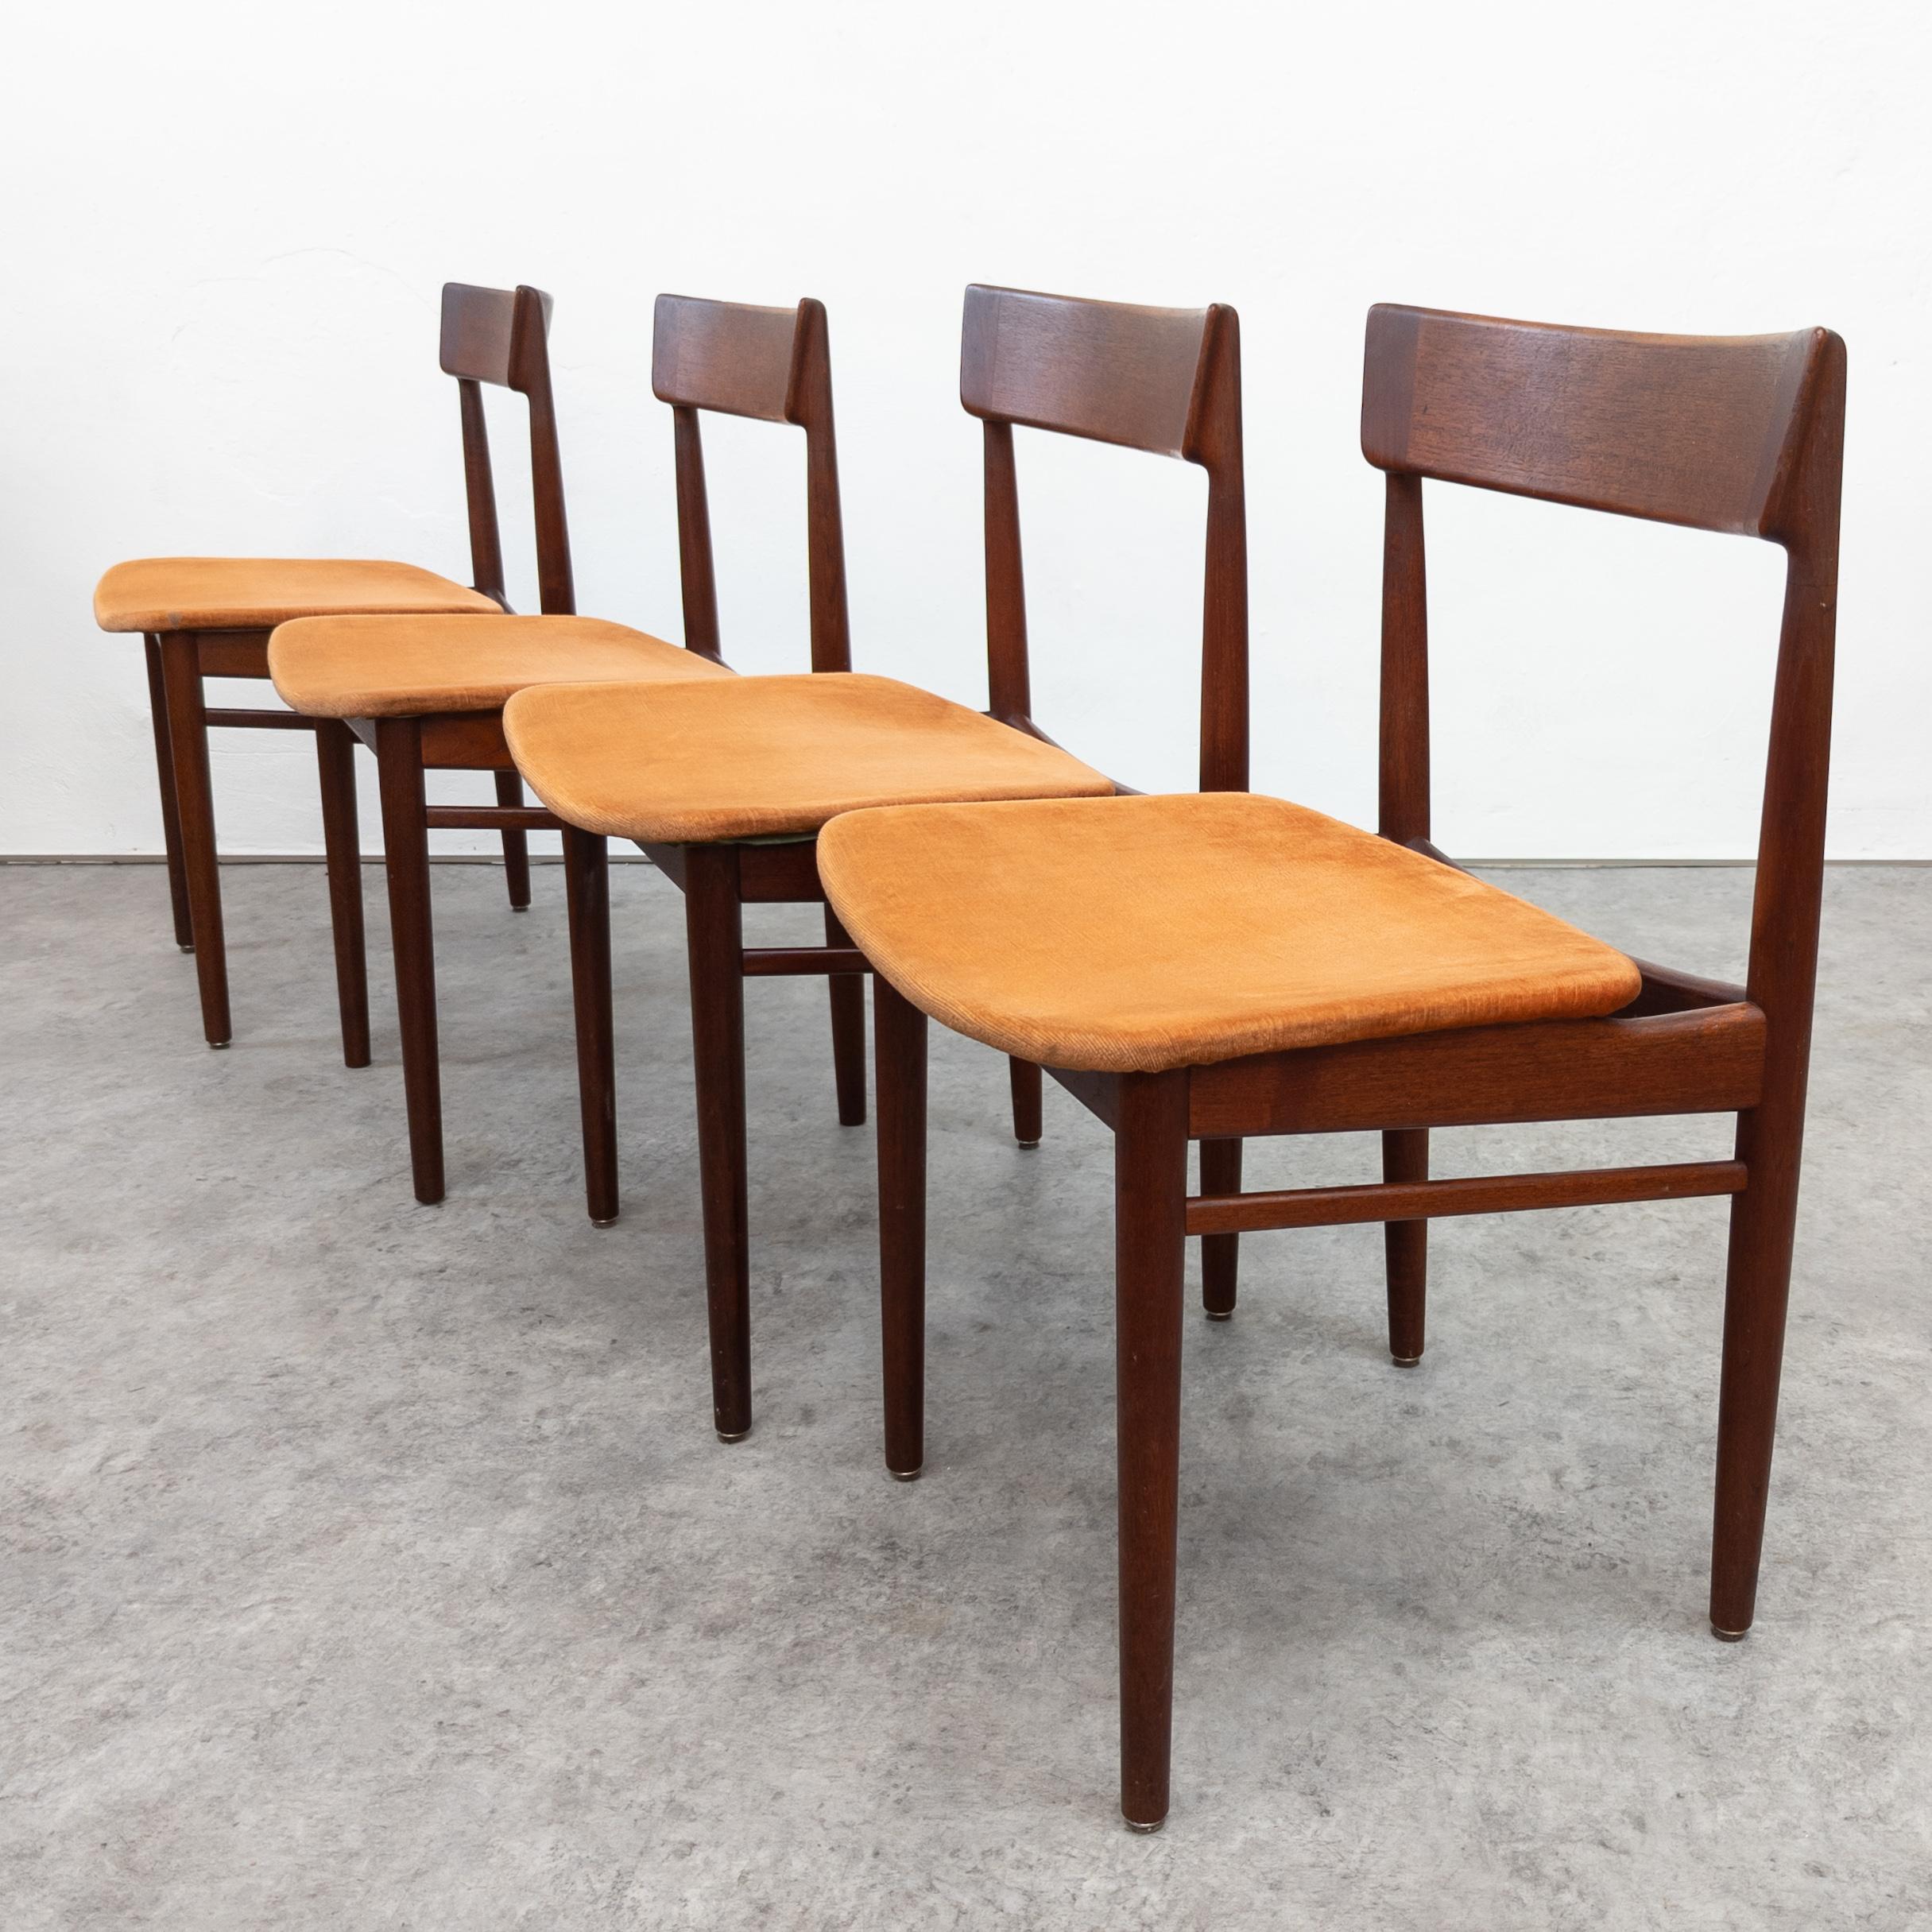 Set of four model 39 dining chairs in rosewood and dark orange fabric. Designed by Henry Rosengren Hansen for Brande Møbelindustri in Denmark during the 1960s. The chairs feature a solid rosewood frame in very good refinished condition. Original